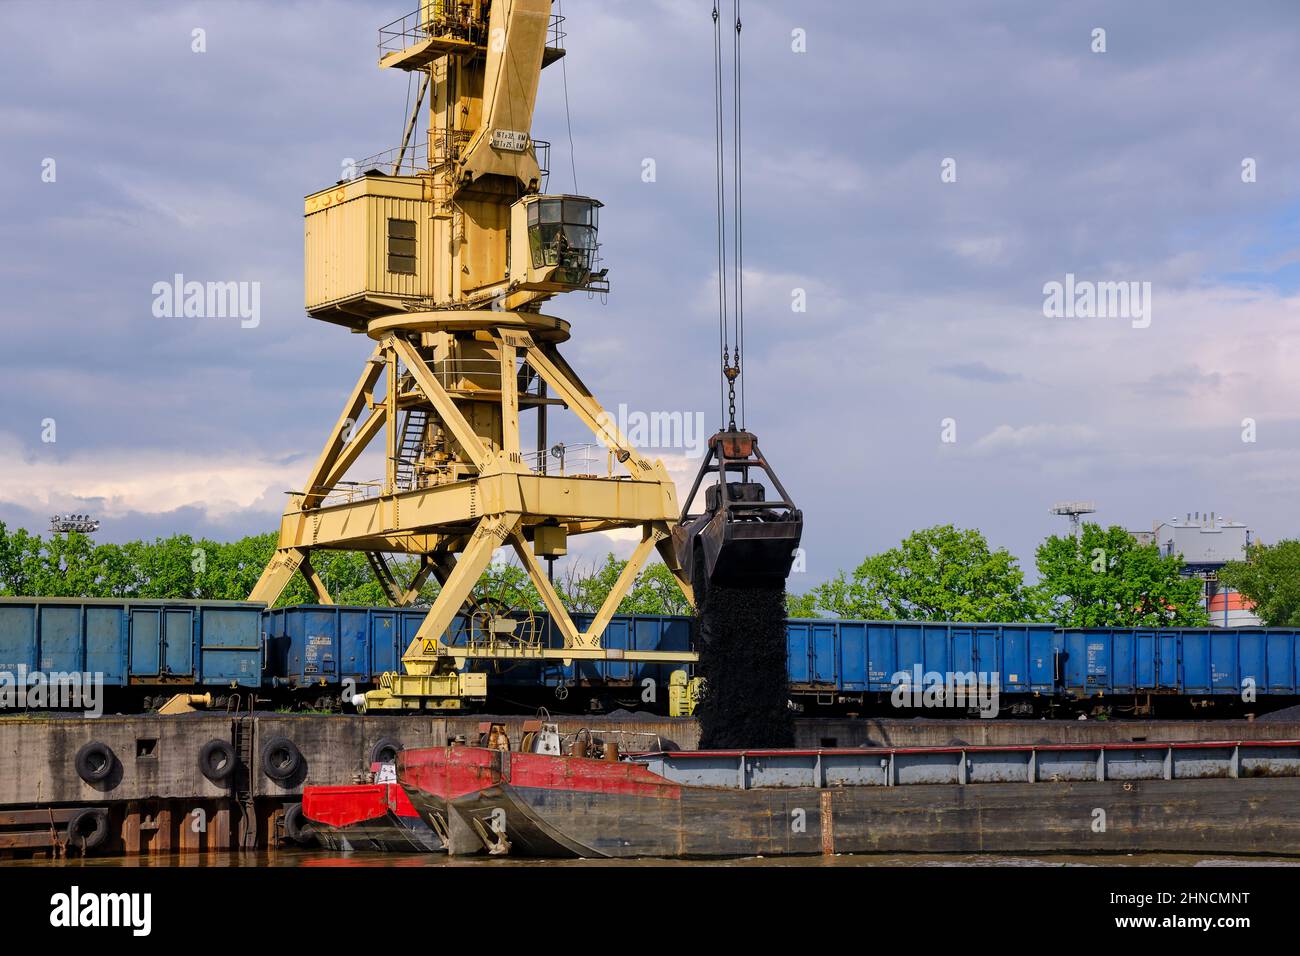 River port crane with clamshell or griper loading coal to river drag boats or barges moored by pier on cloudy day. Energy, minerals, environment  Stock Photo